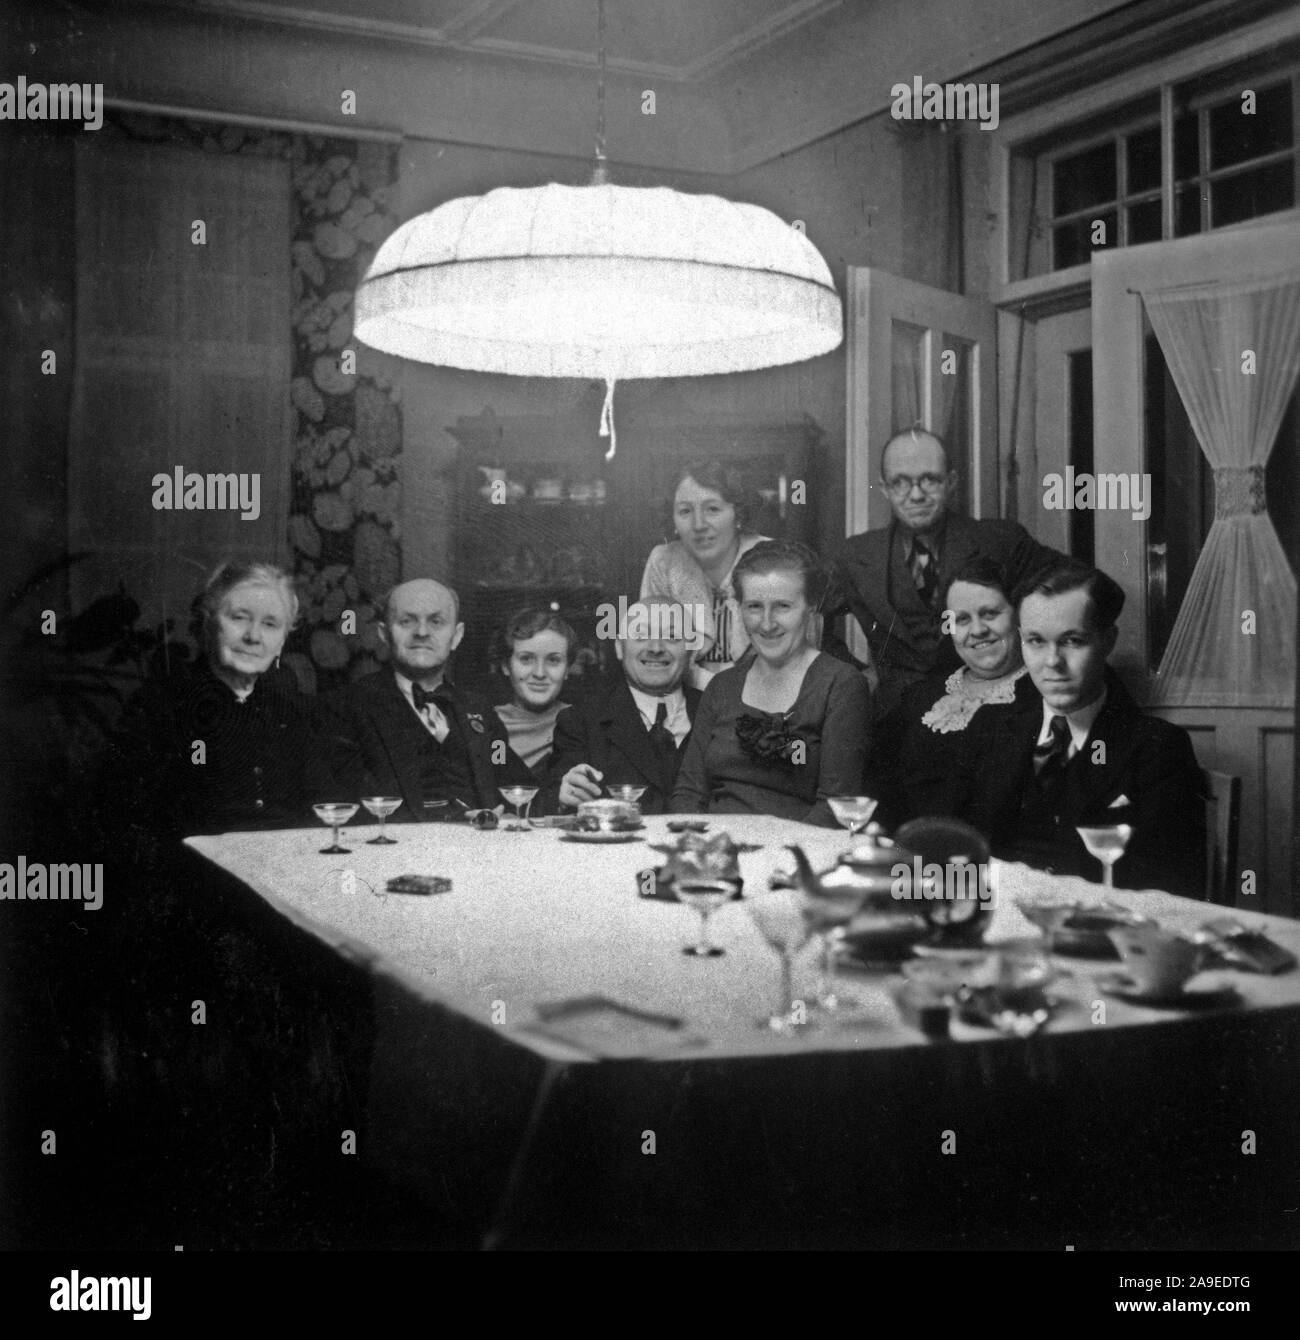 Eva Braun Collection (Album 2) - Family sitting for group portrait at table in what appears to be a dining room Stock Photo